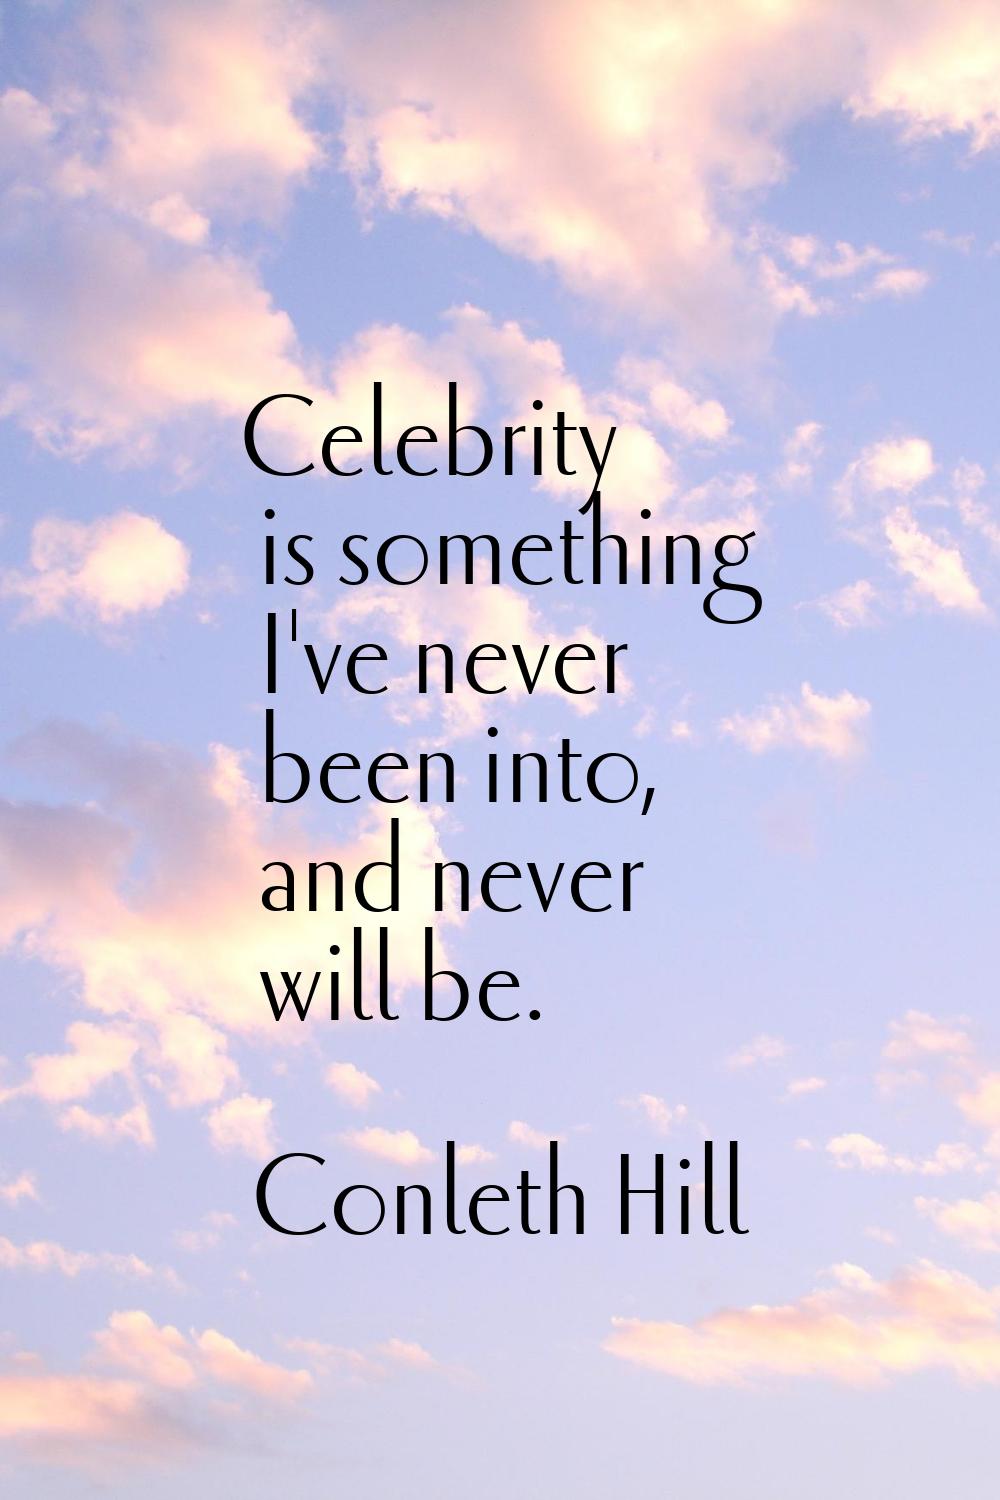 Celebrity is something I've never been into, and never will be.